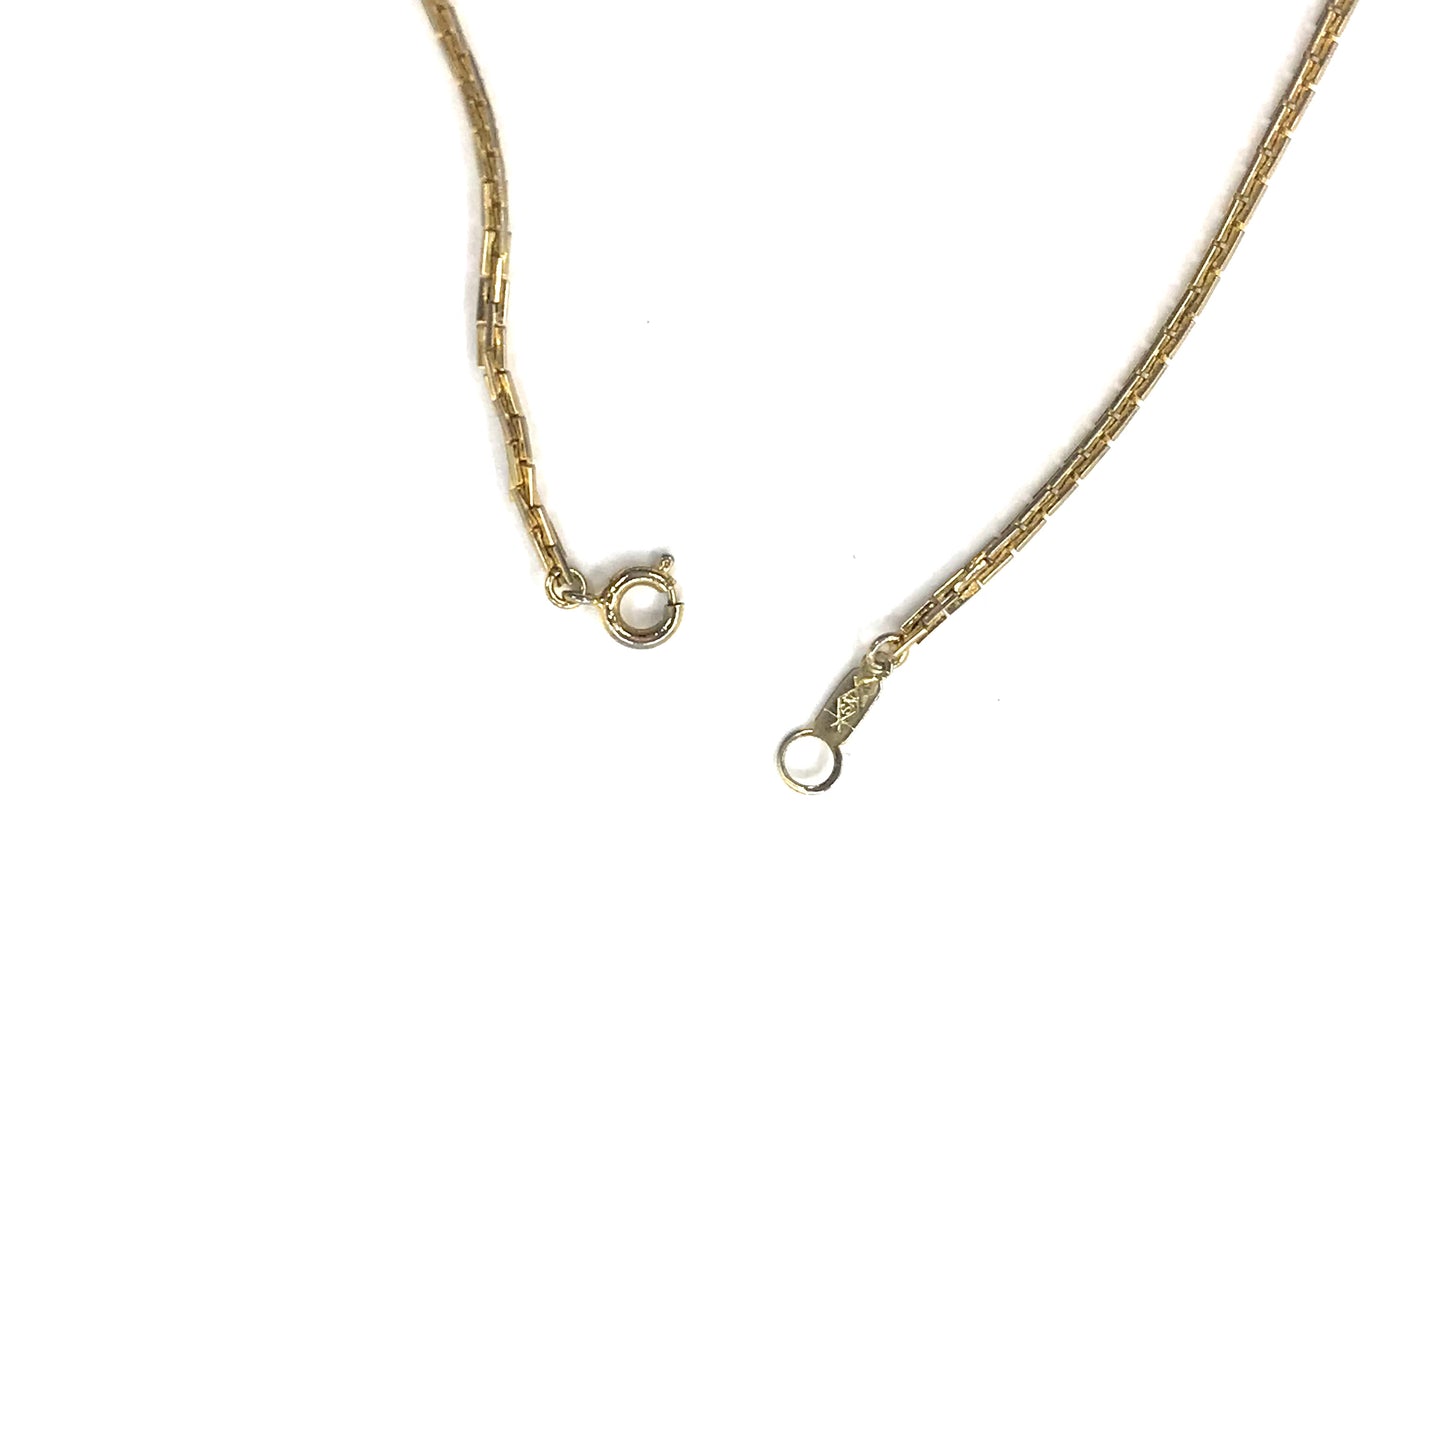 VINTAGE Long Gold Chain Necklaces ロングゴールドチェーンネックレス 155cm